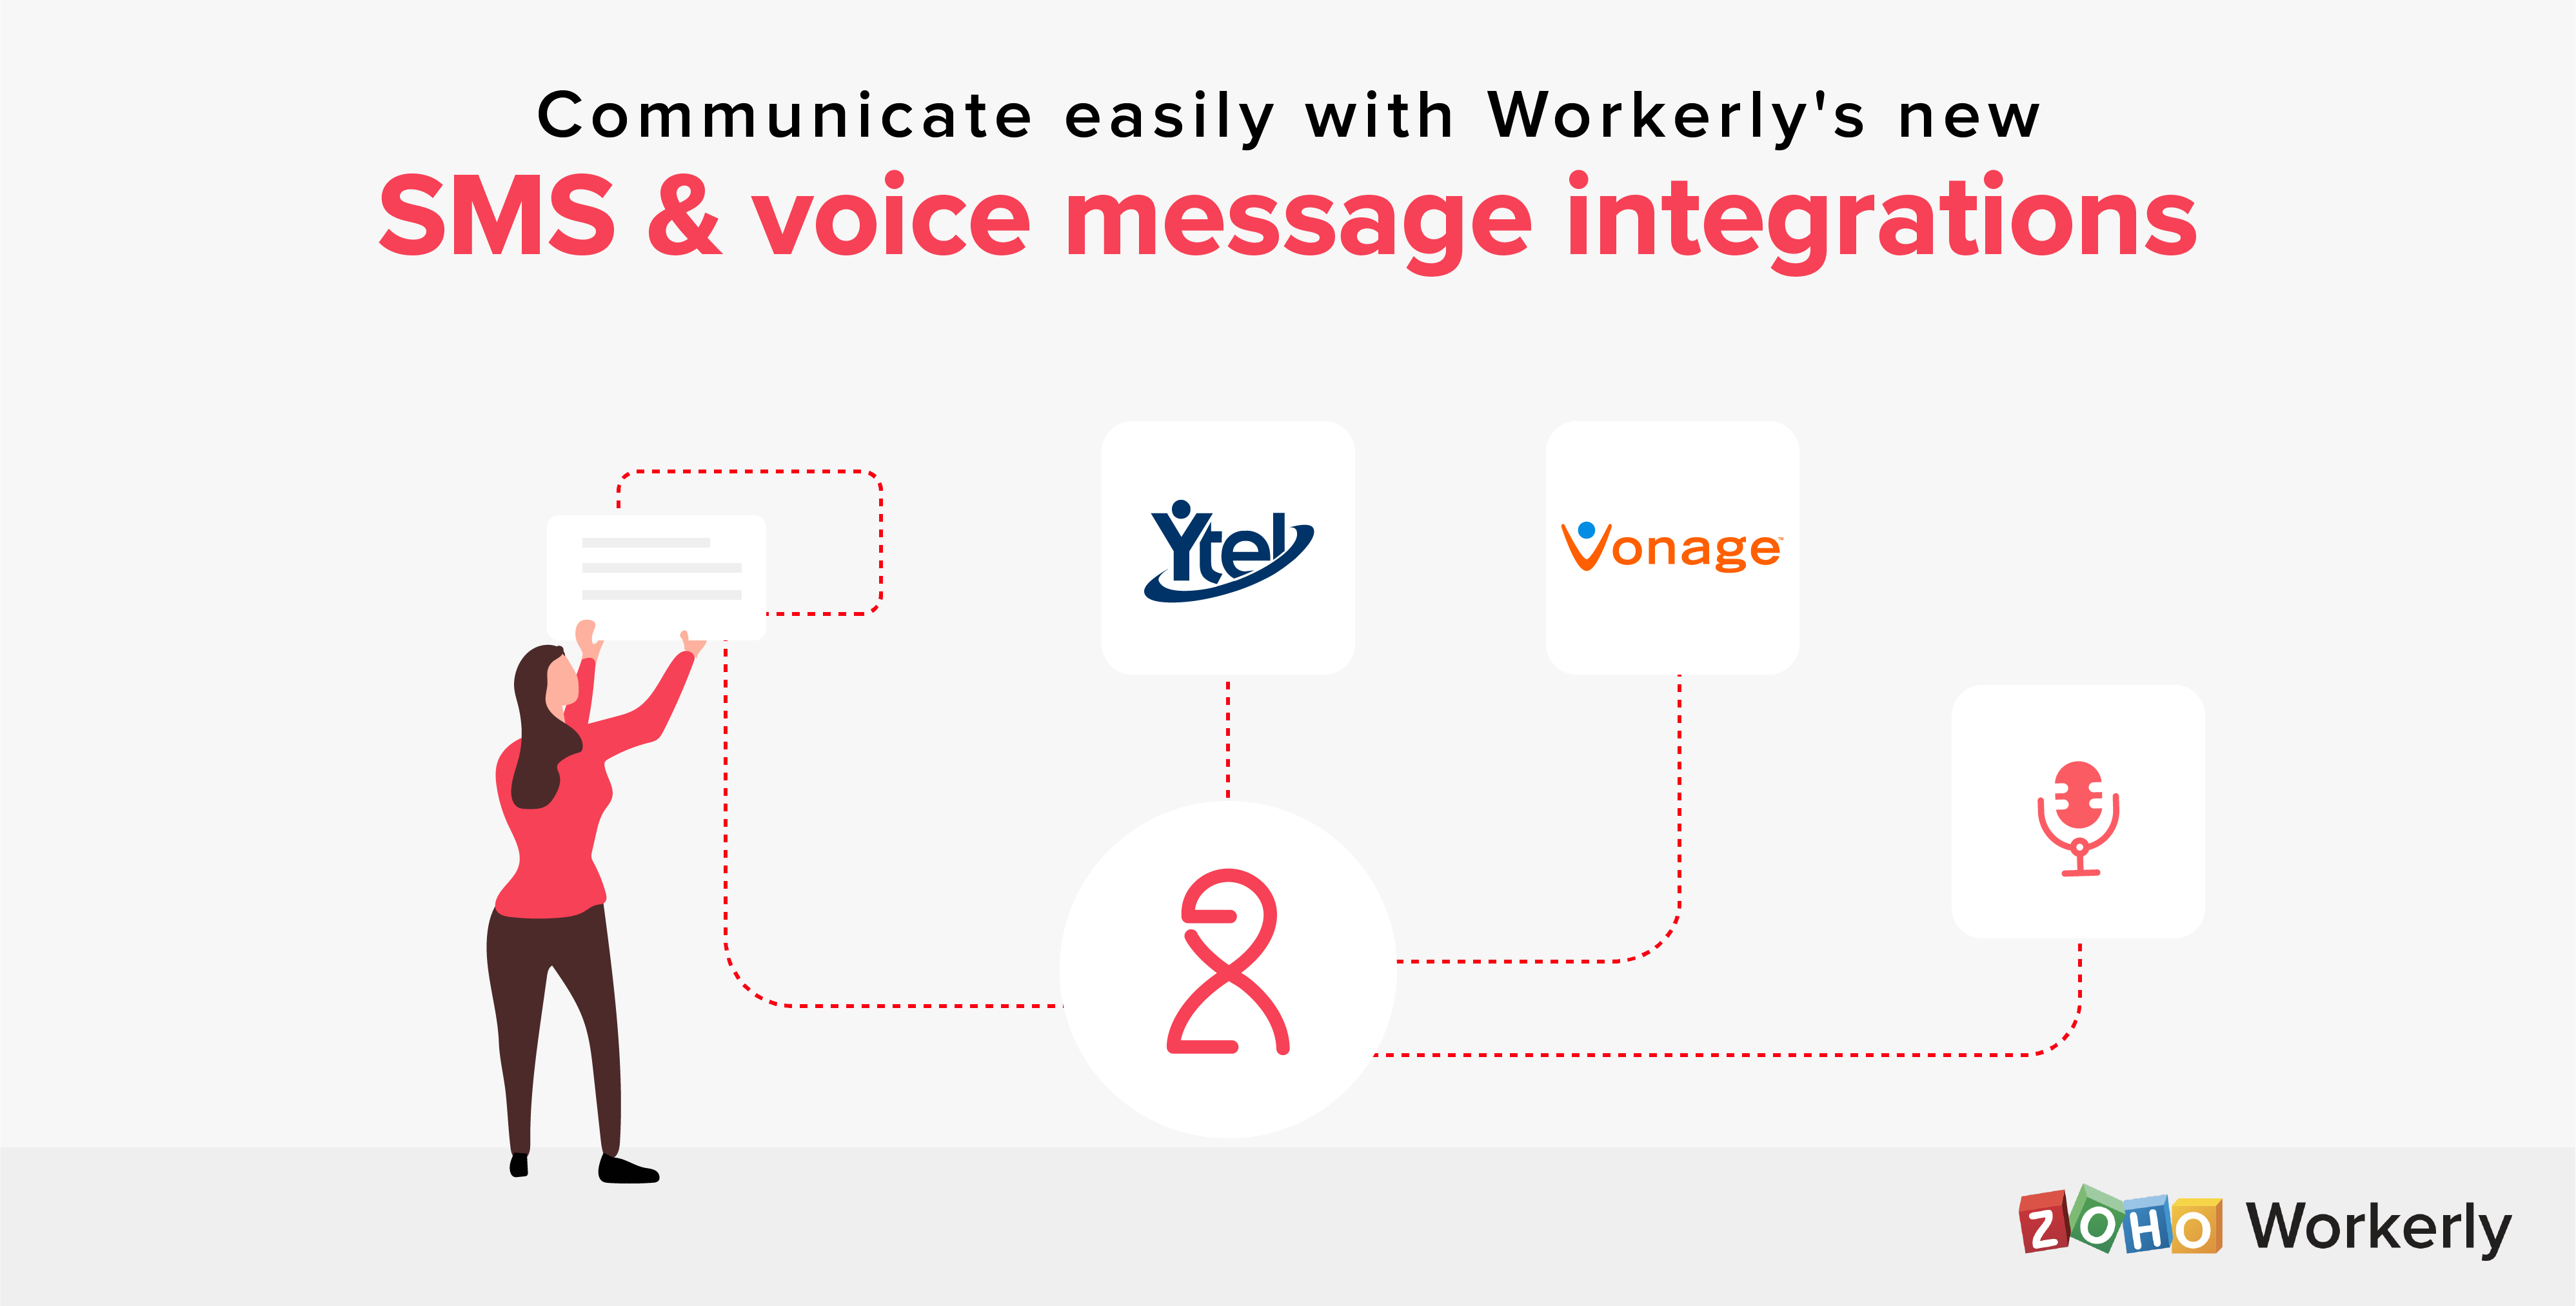 ytel and vonage for zoho workerly